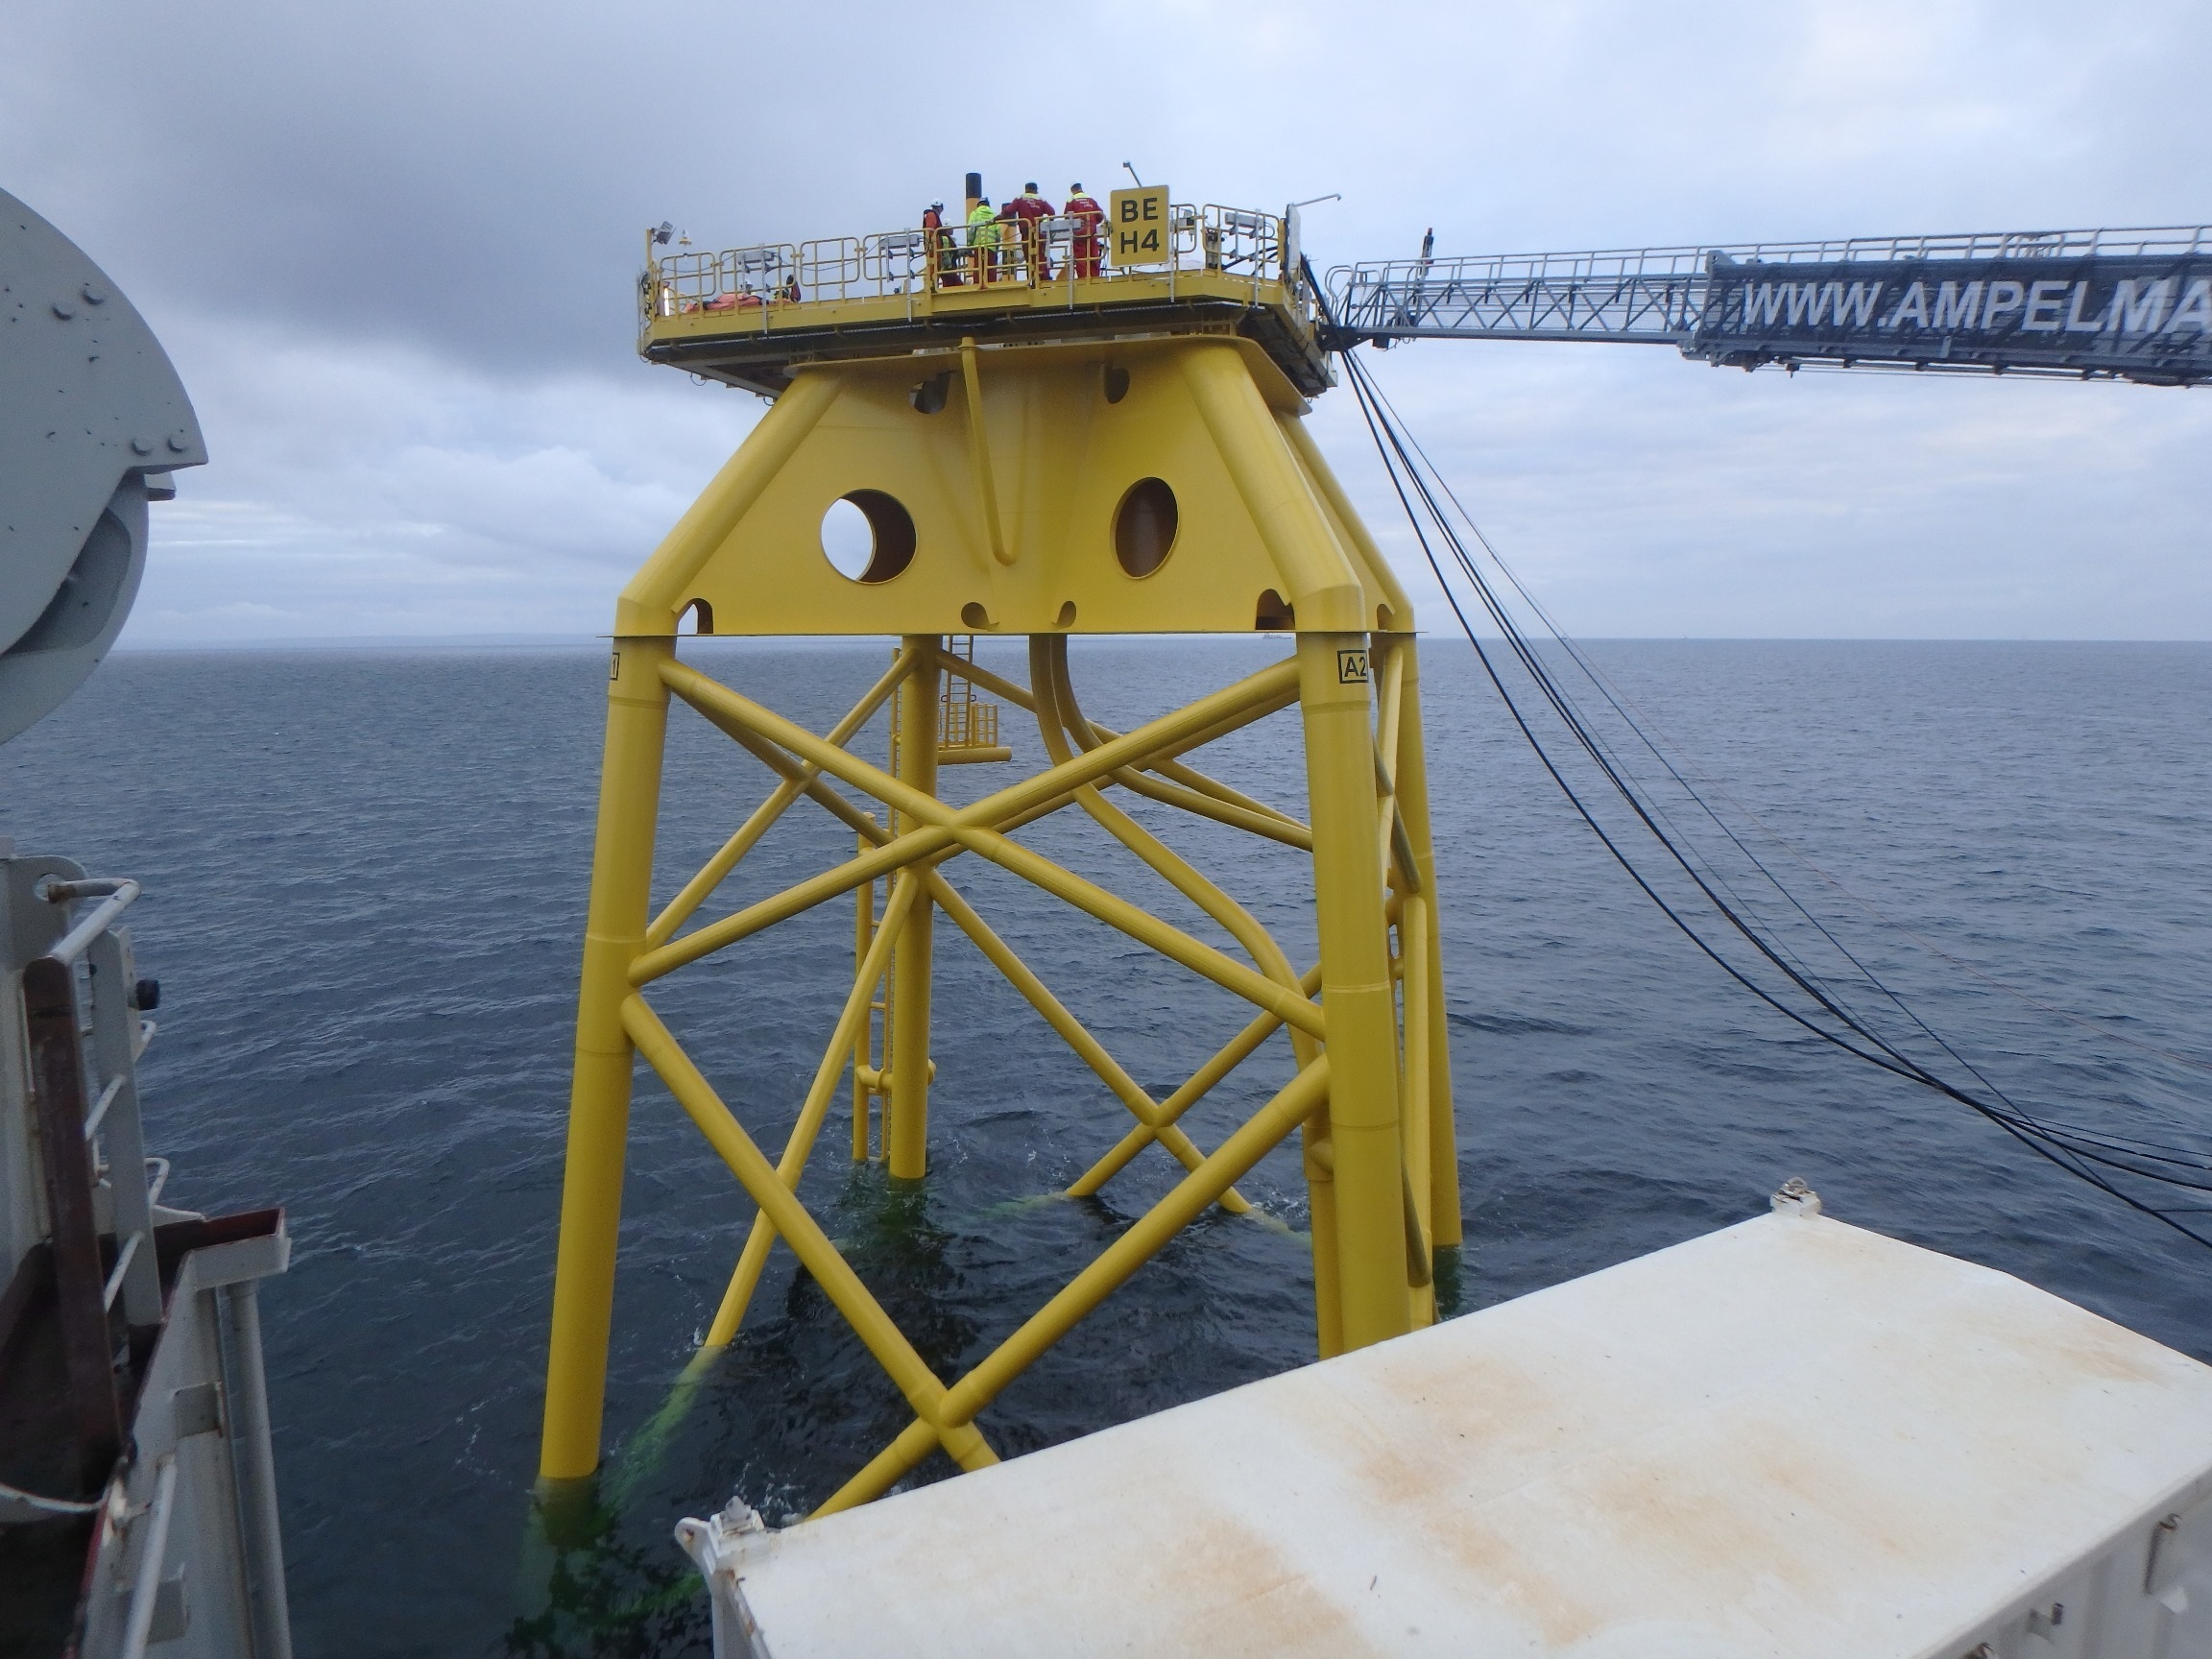 The first jacket for the Beatrice Offshore Wind Farm has been installed.